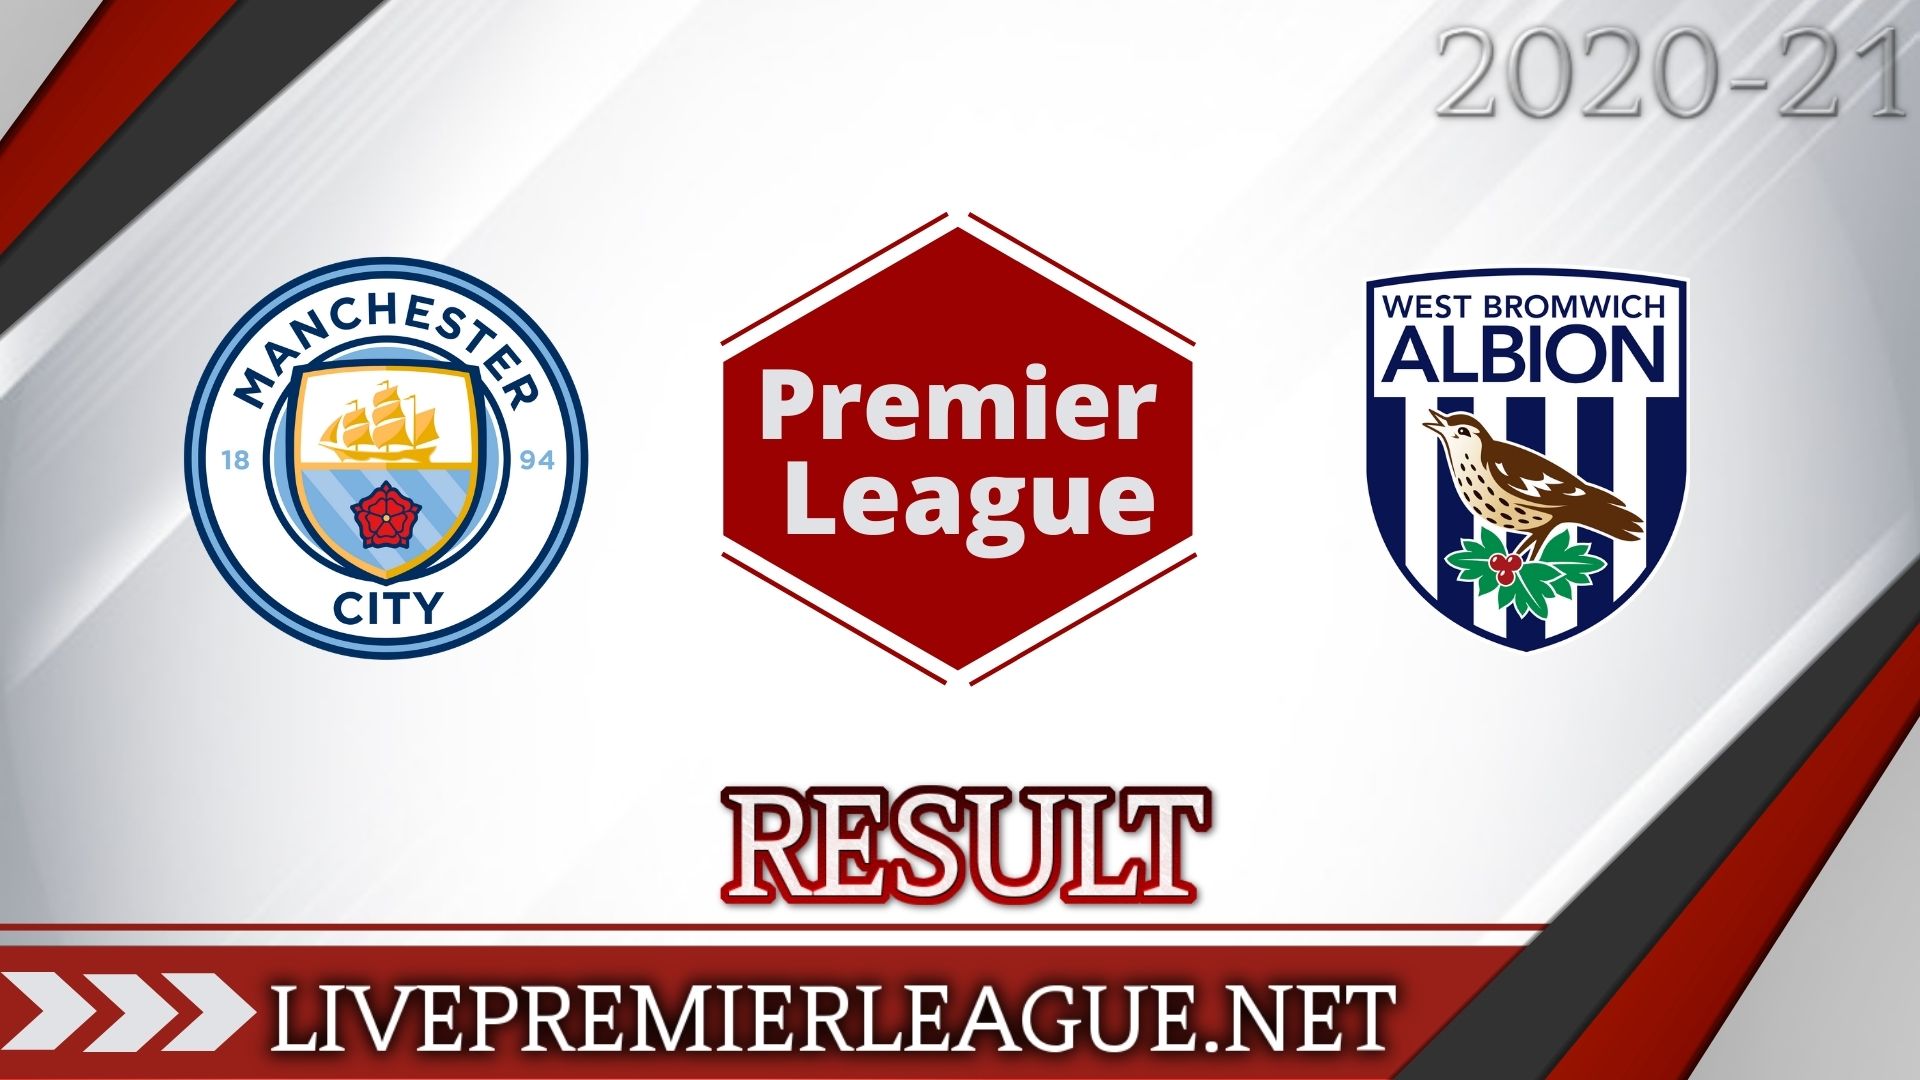 Manchester City Vs West Bromwich Albion | Week 13 Result 2020